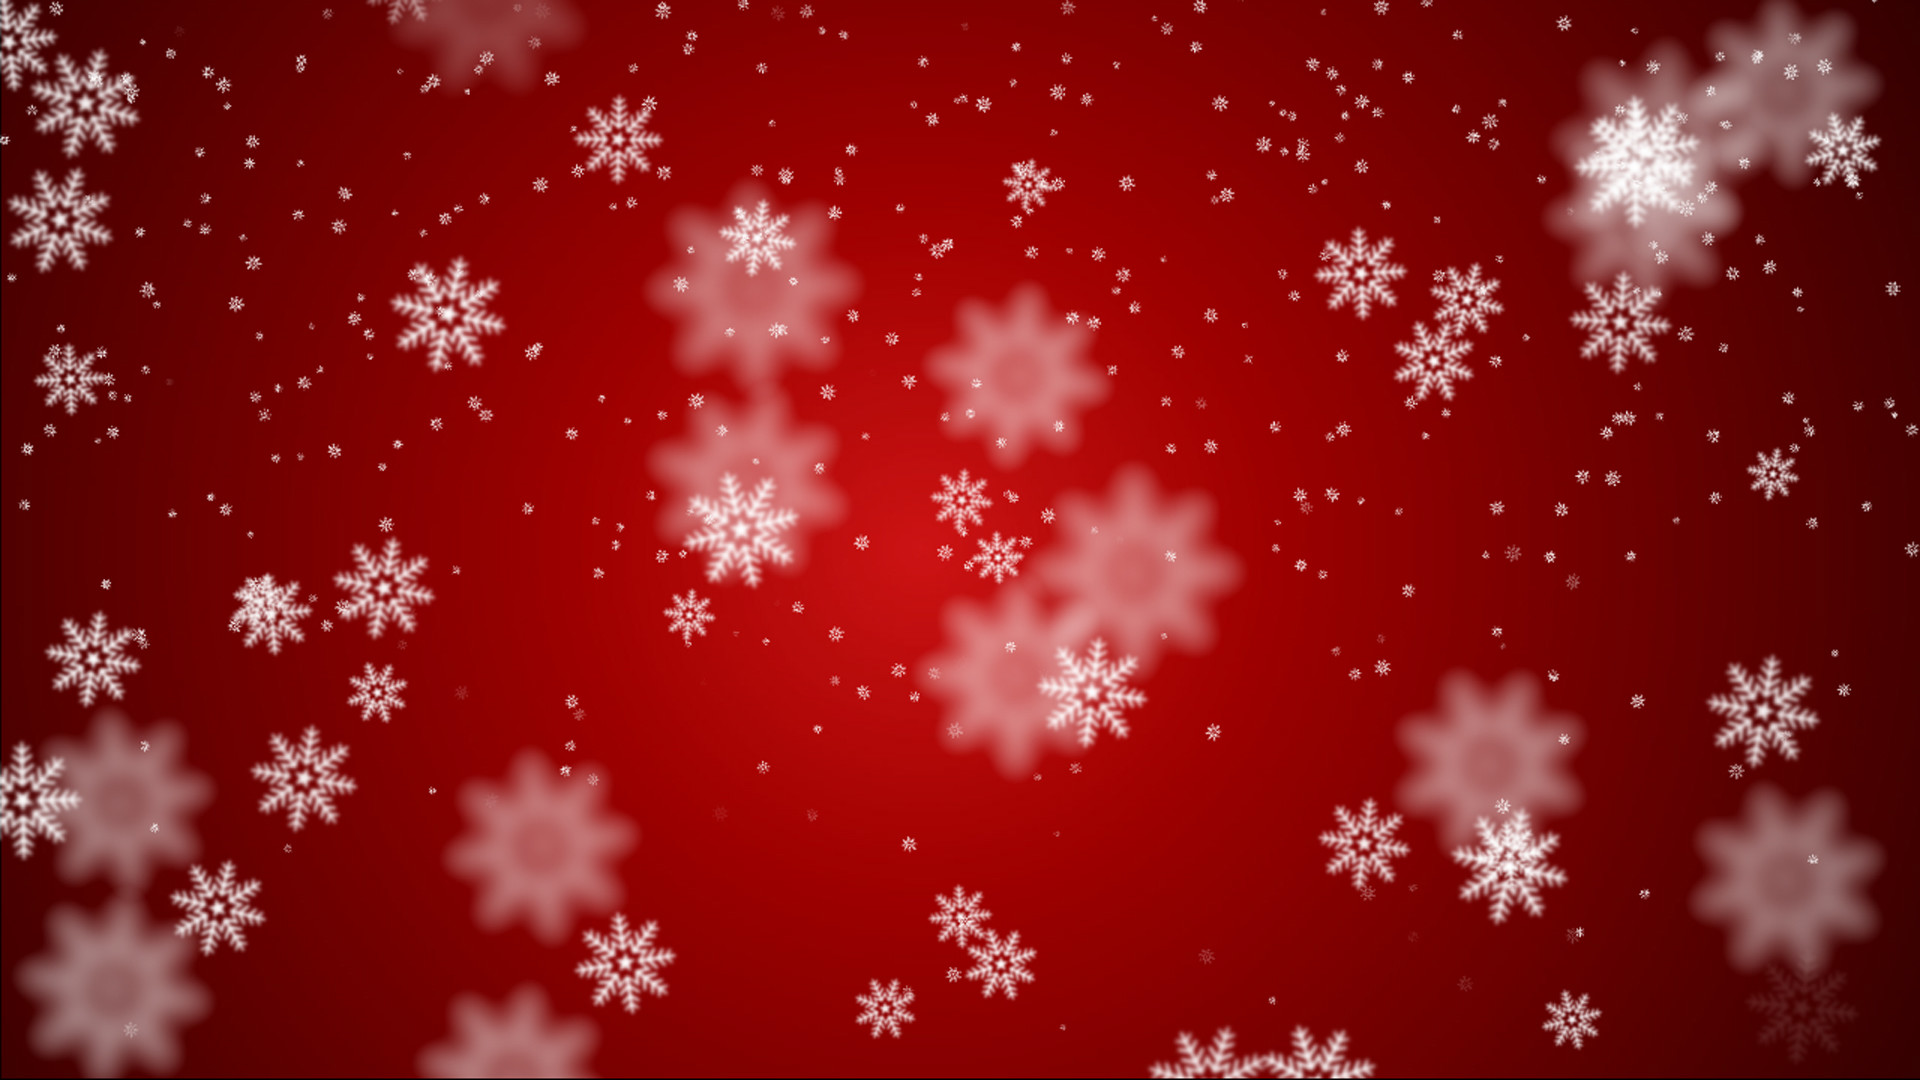 1920x1080 Red Christmas Backgrounds